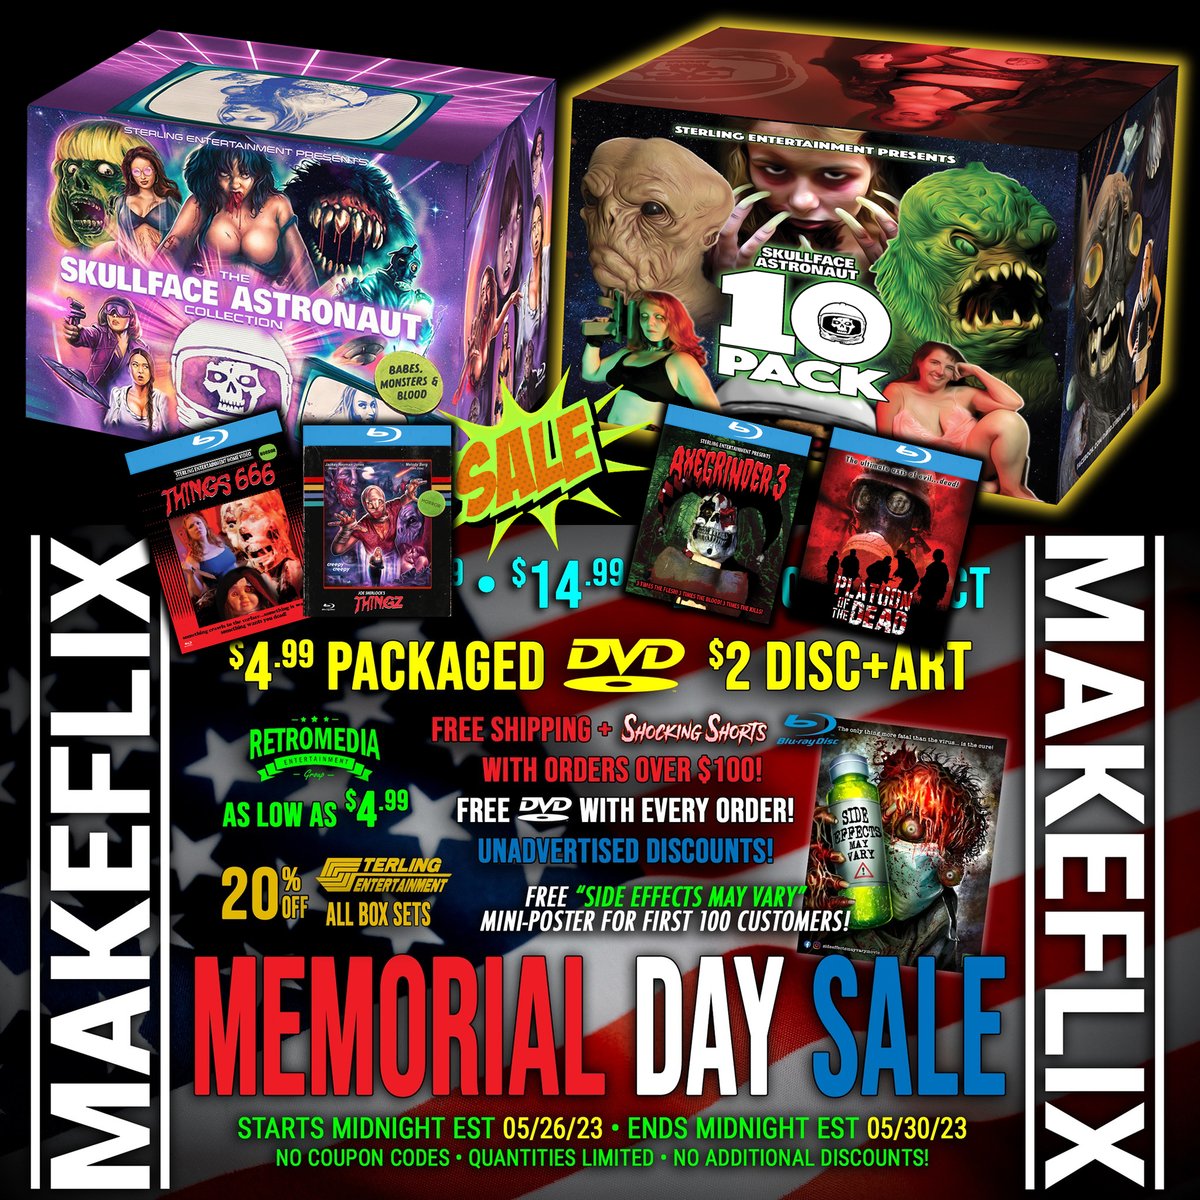 MEMORIAL DAY WEEKEND ONLY: My box sets and a few select titles are all on sale this weekend over at @makeflix ! makeflix.com/collections/me…

#makeflix #memorialday #weekend #sale #bluray #DVD #freebies #jrbookwalter #skullfaceastronaut #fredolenray #joesherlock #SterlingEntertainment